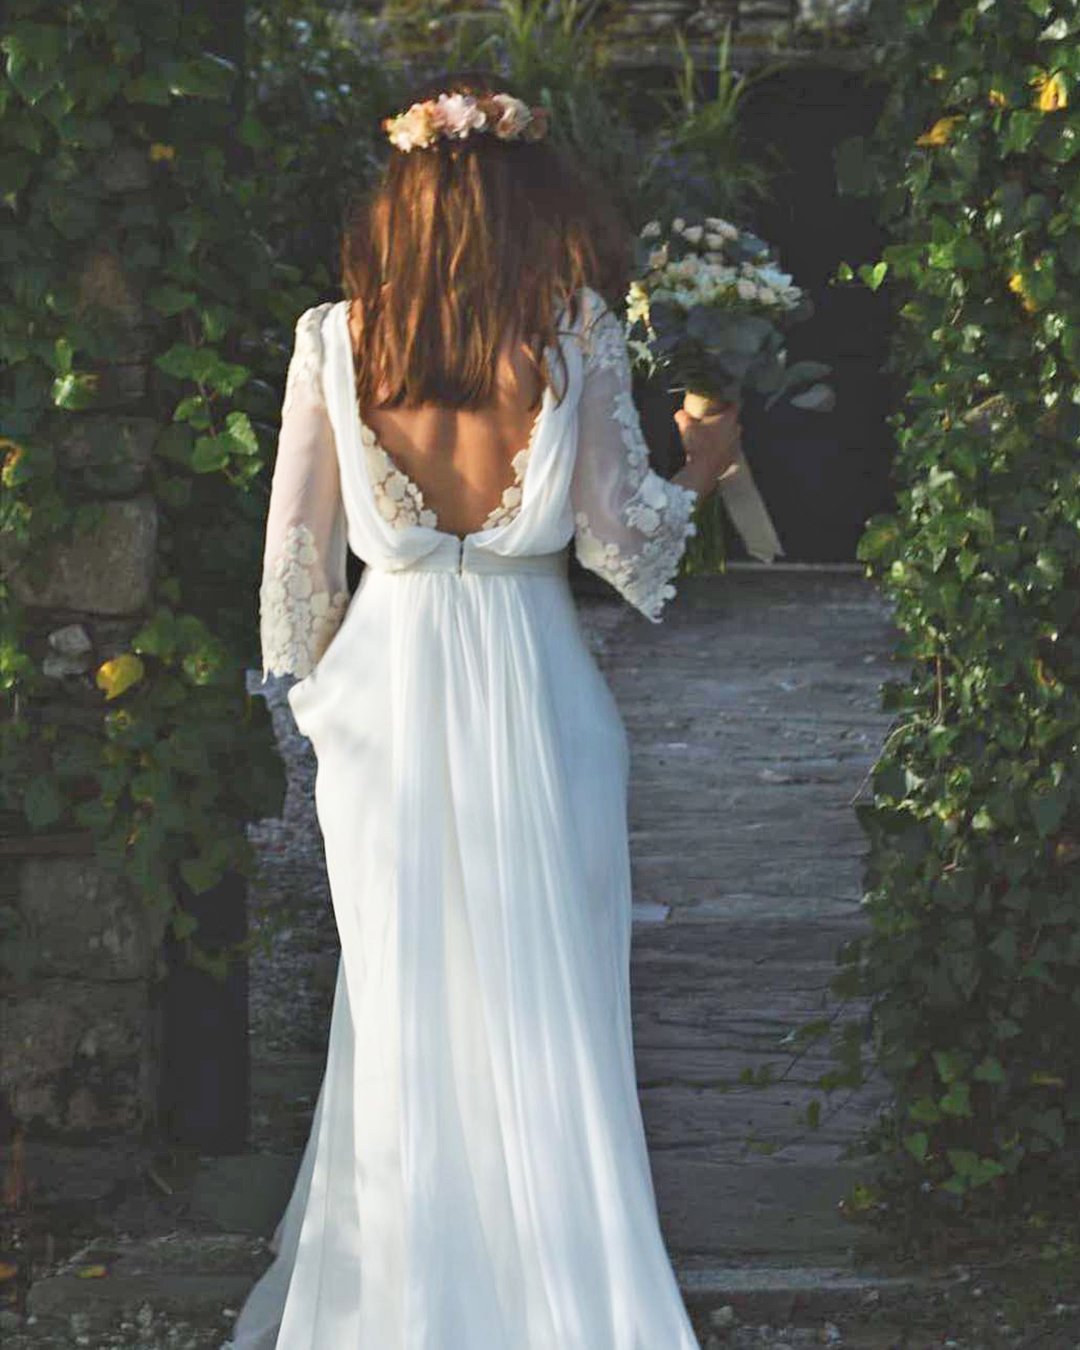 Rustic Wedding Dresses: 30 Perfect Styles You'll Love